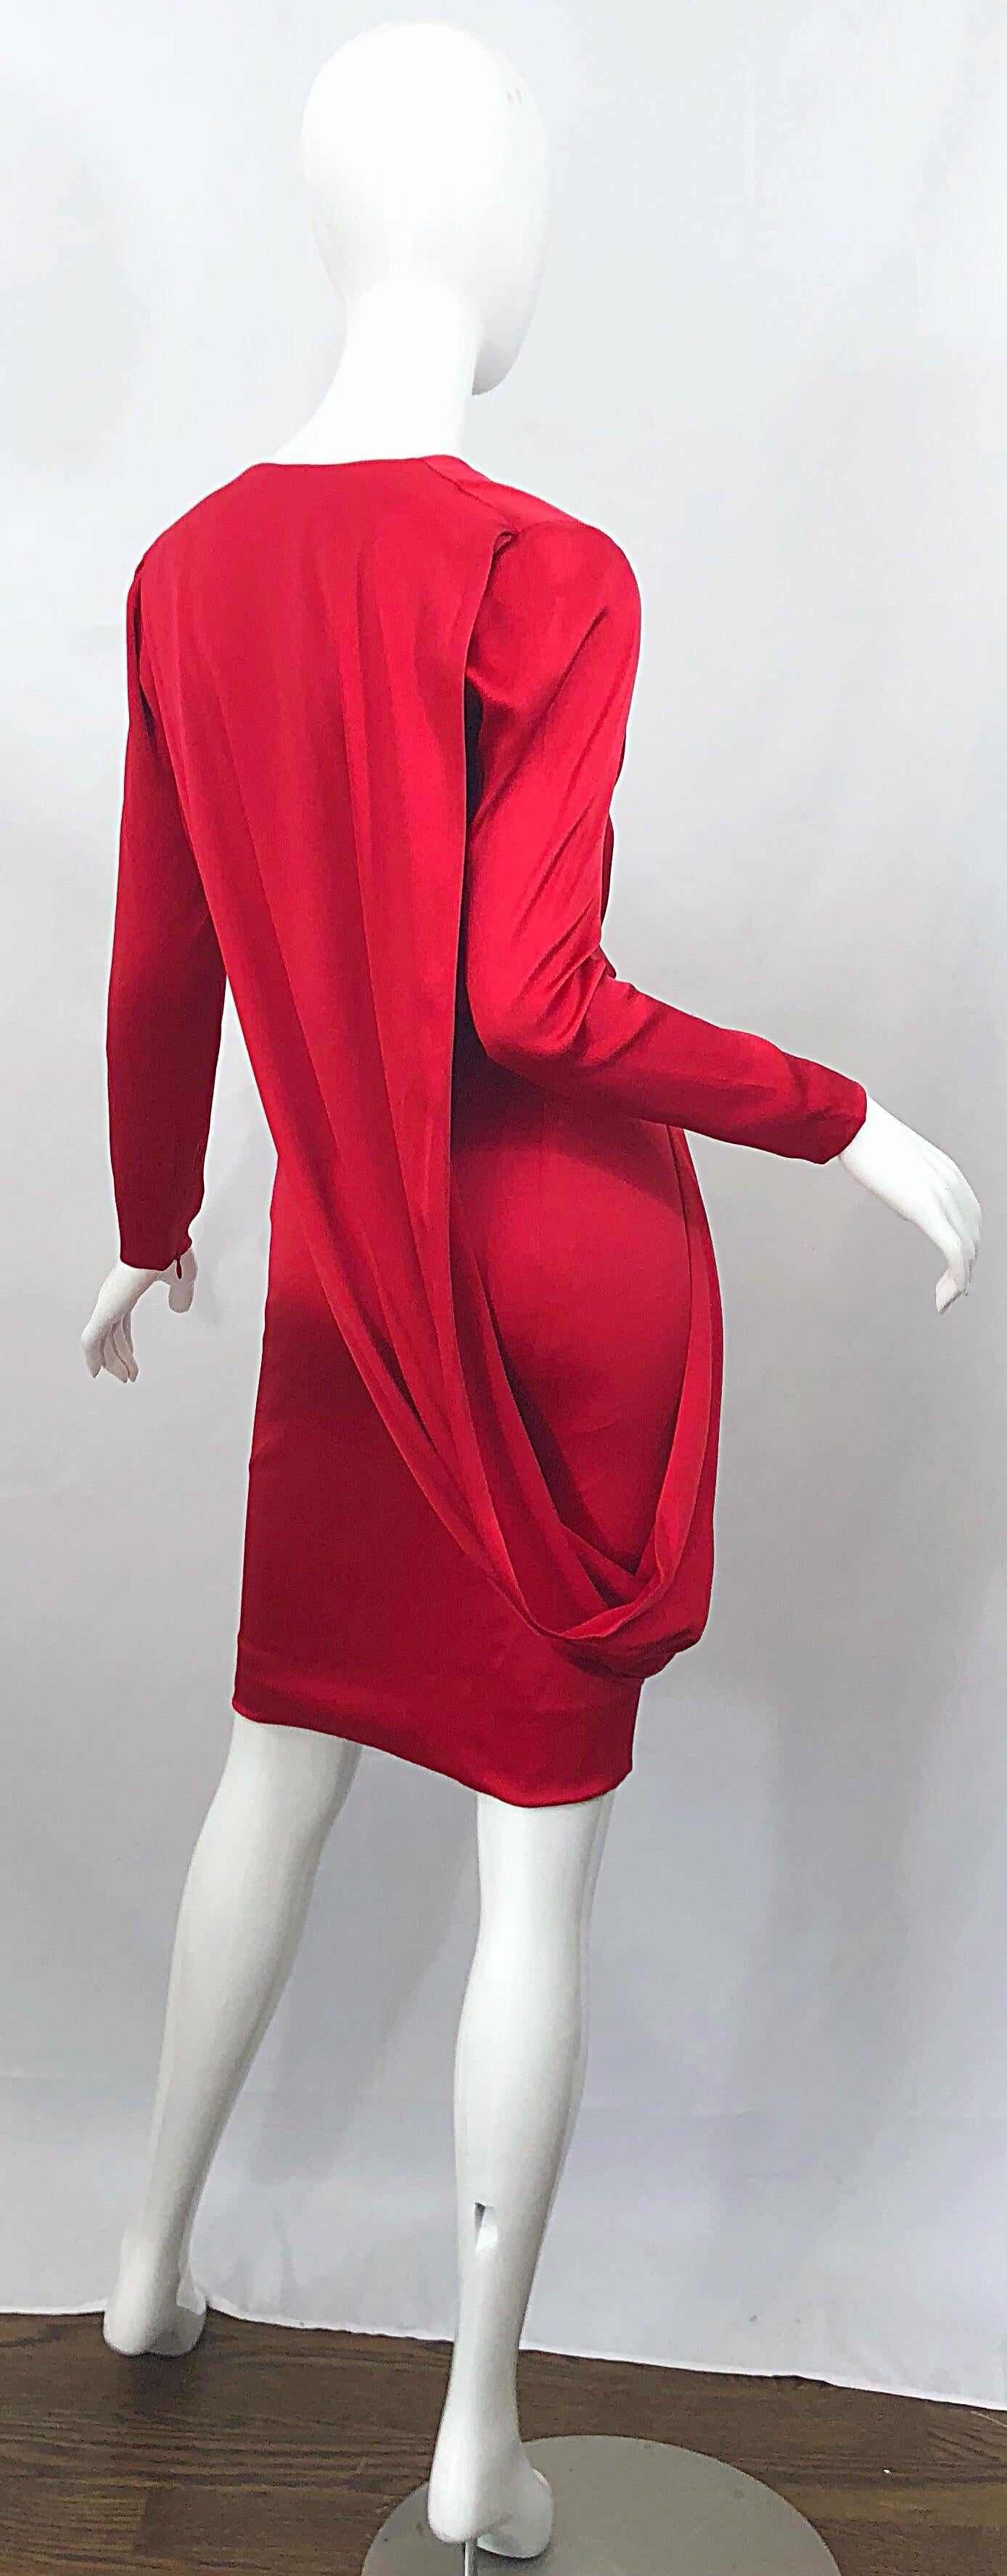 Vintage Givenchy Couture by Alexander McQueen Sz 36 Lipstick Red Silk Cape Dress For Sale 4